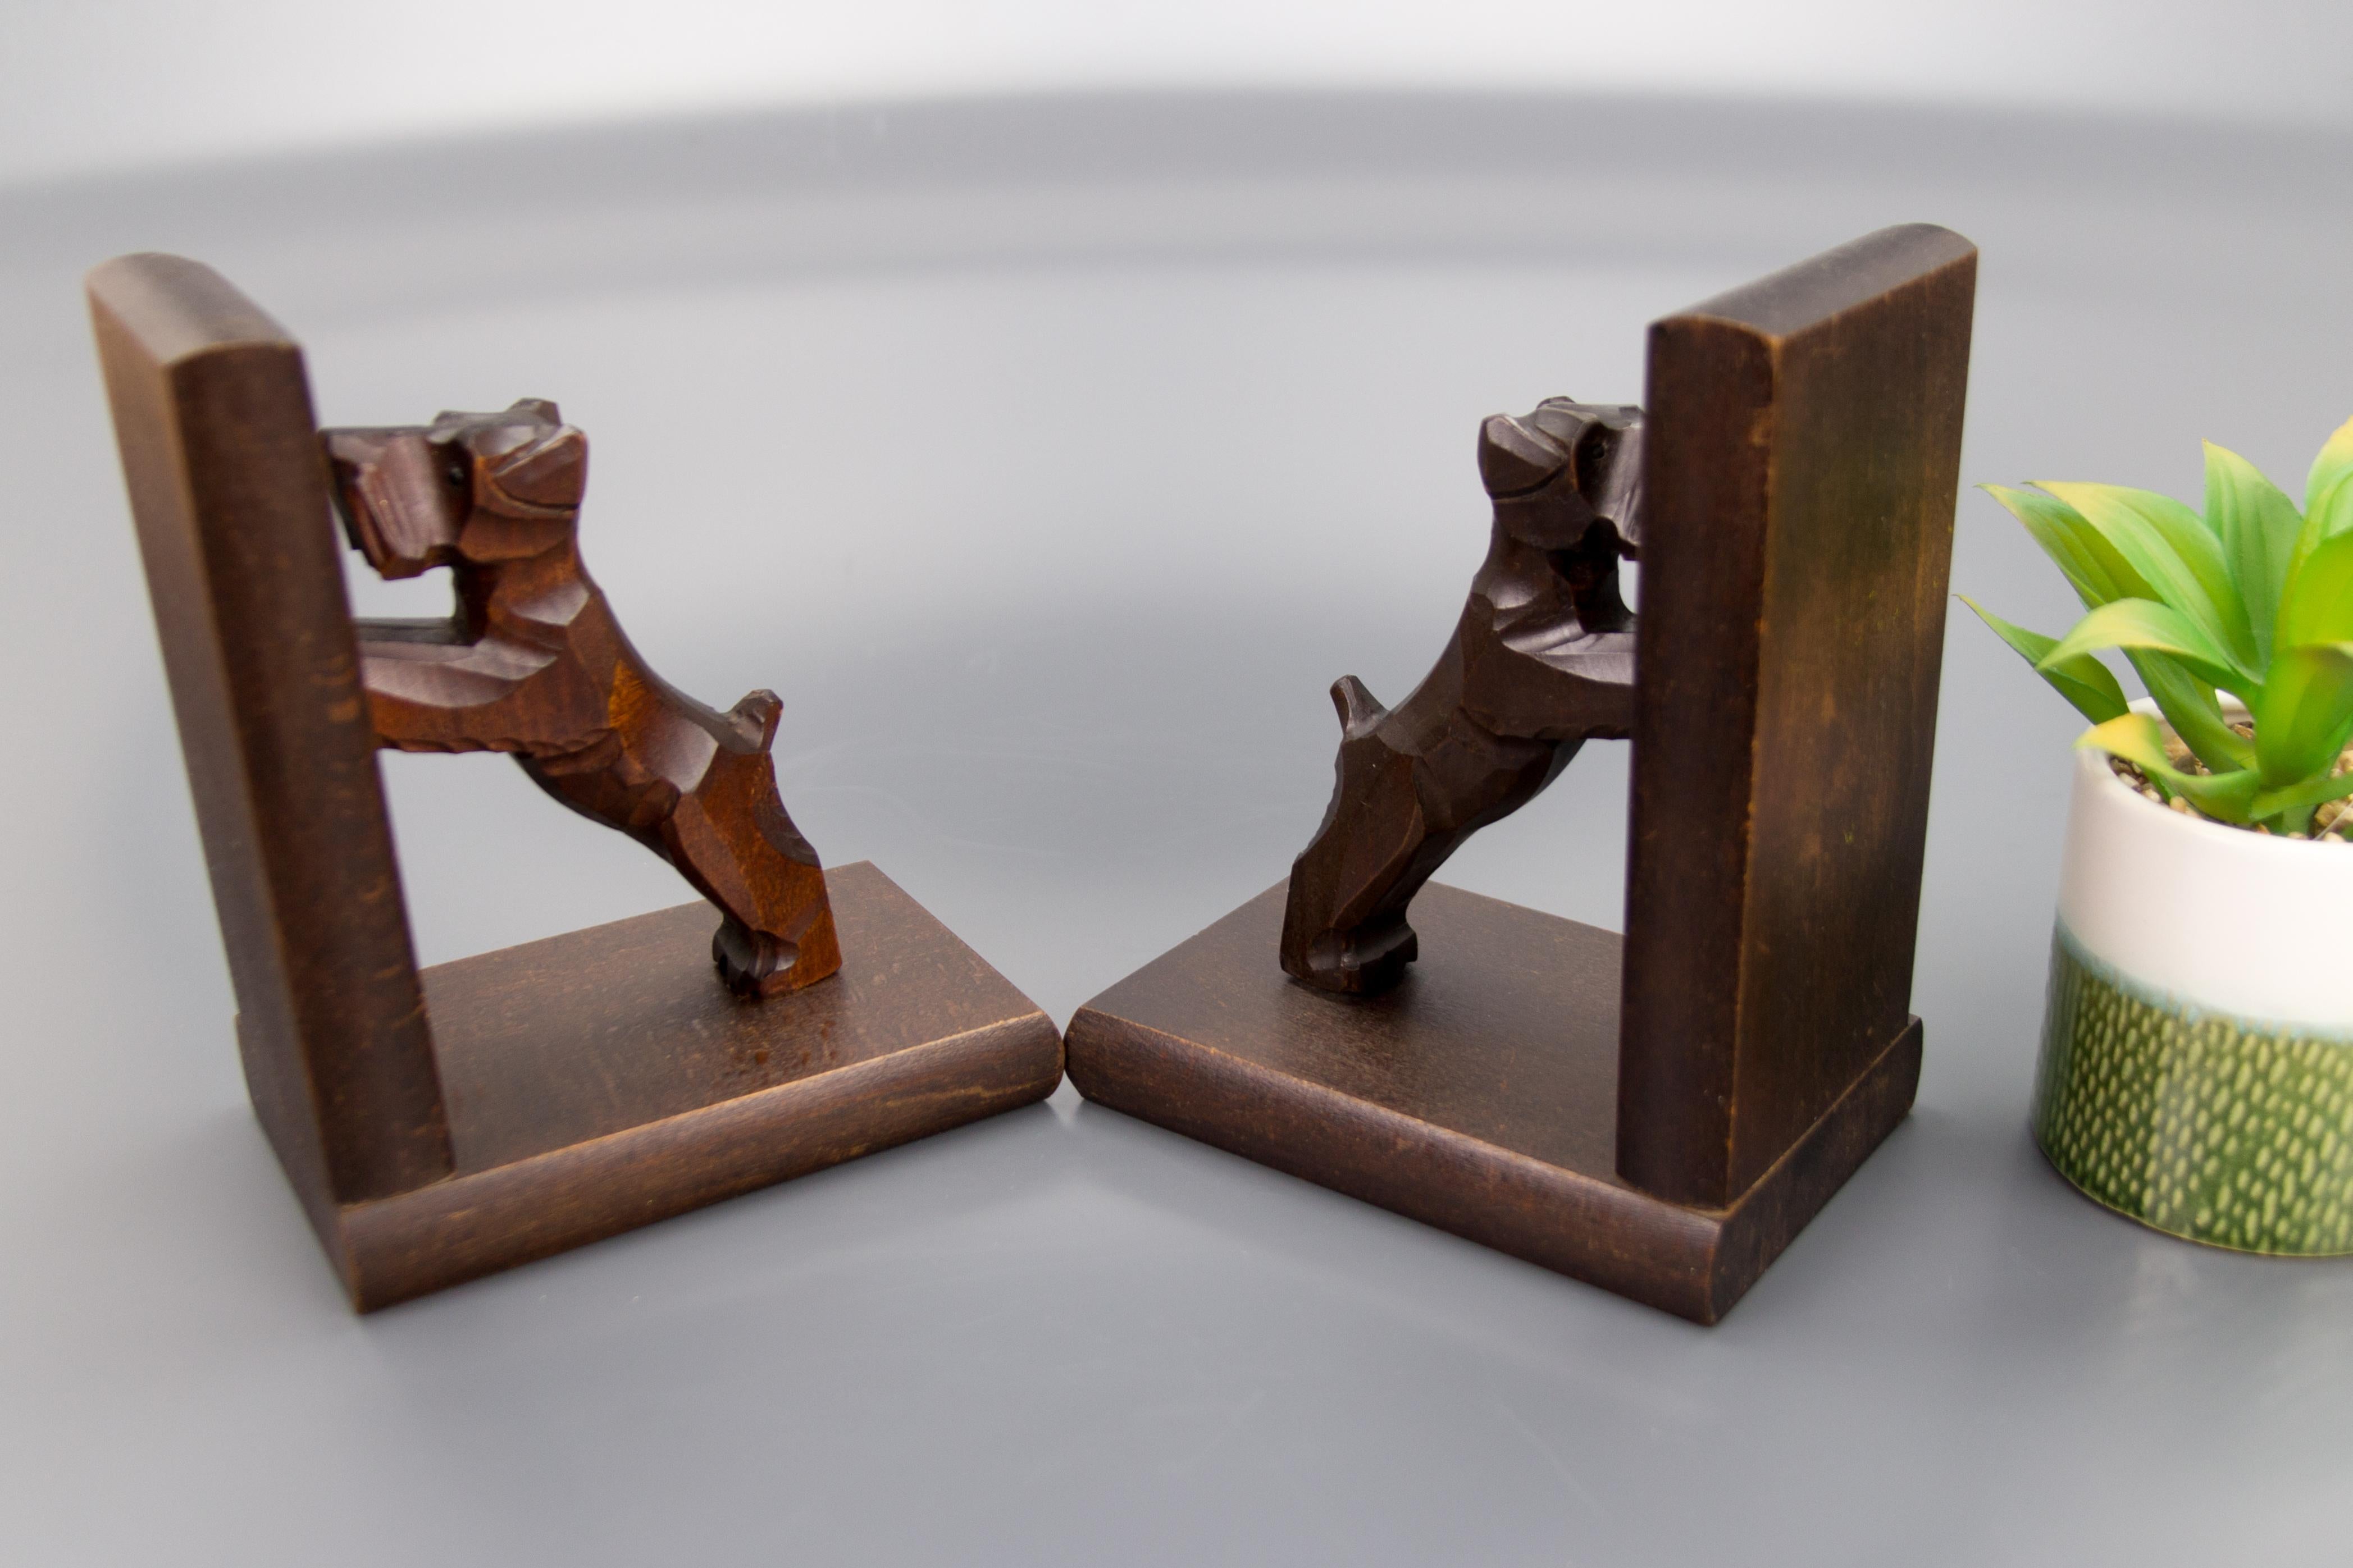 Hand Carved Terrier Wooden Bookends by Dörsch Oberweid, Germany 2